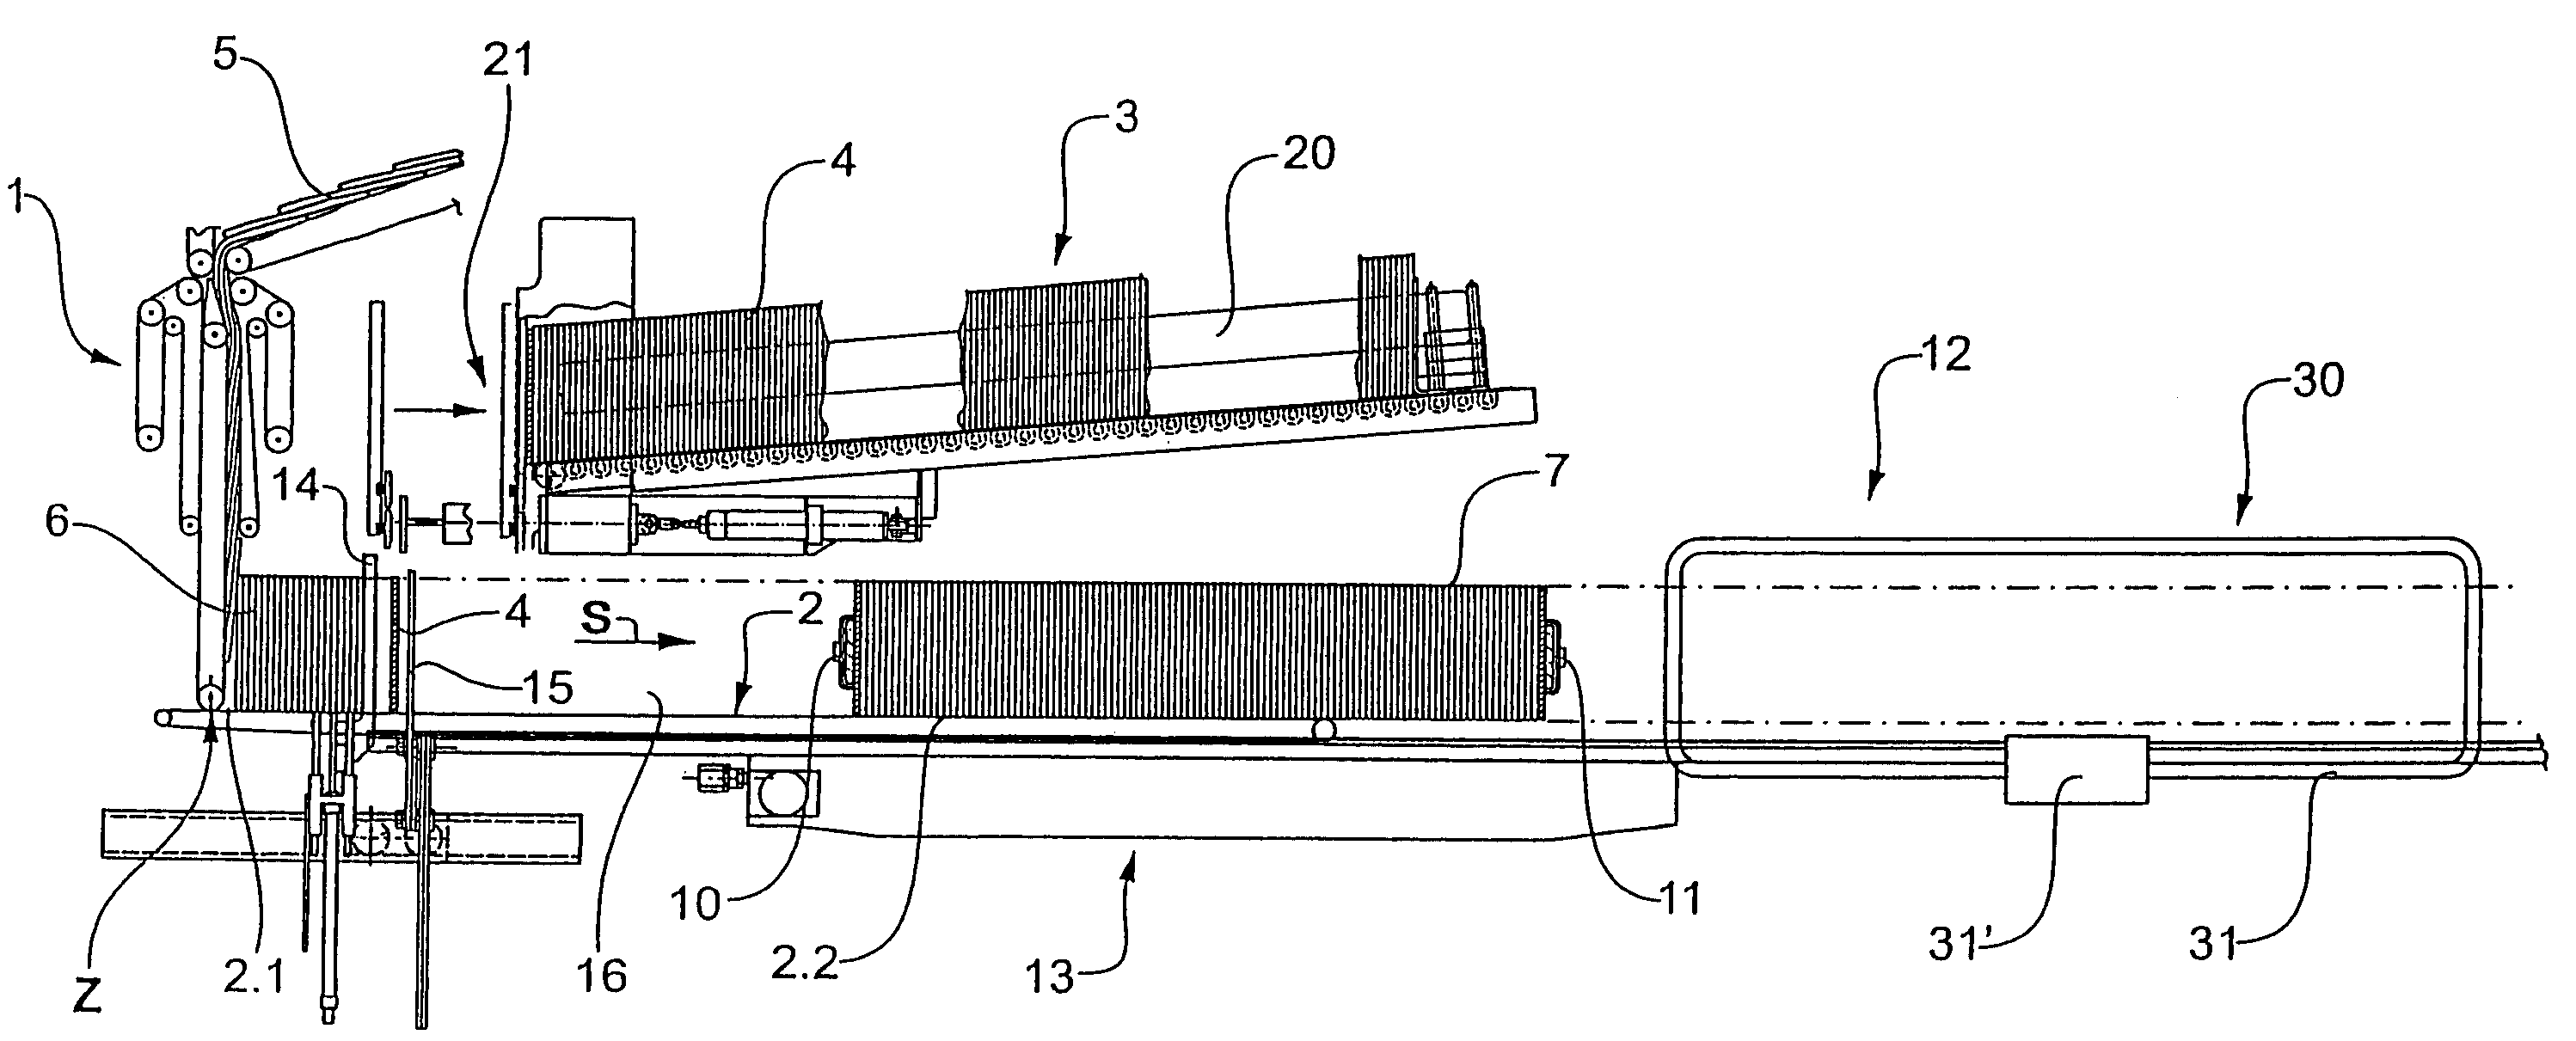 Method and device for forming horizontal stacks of printed products and securing said stacks with straps